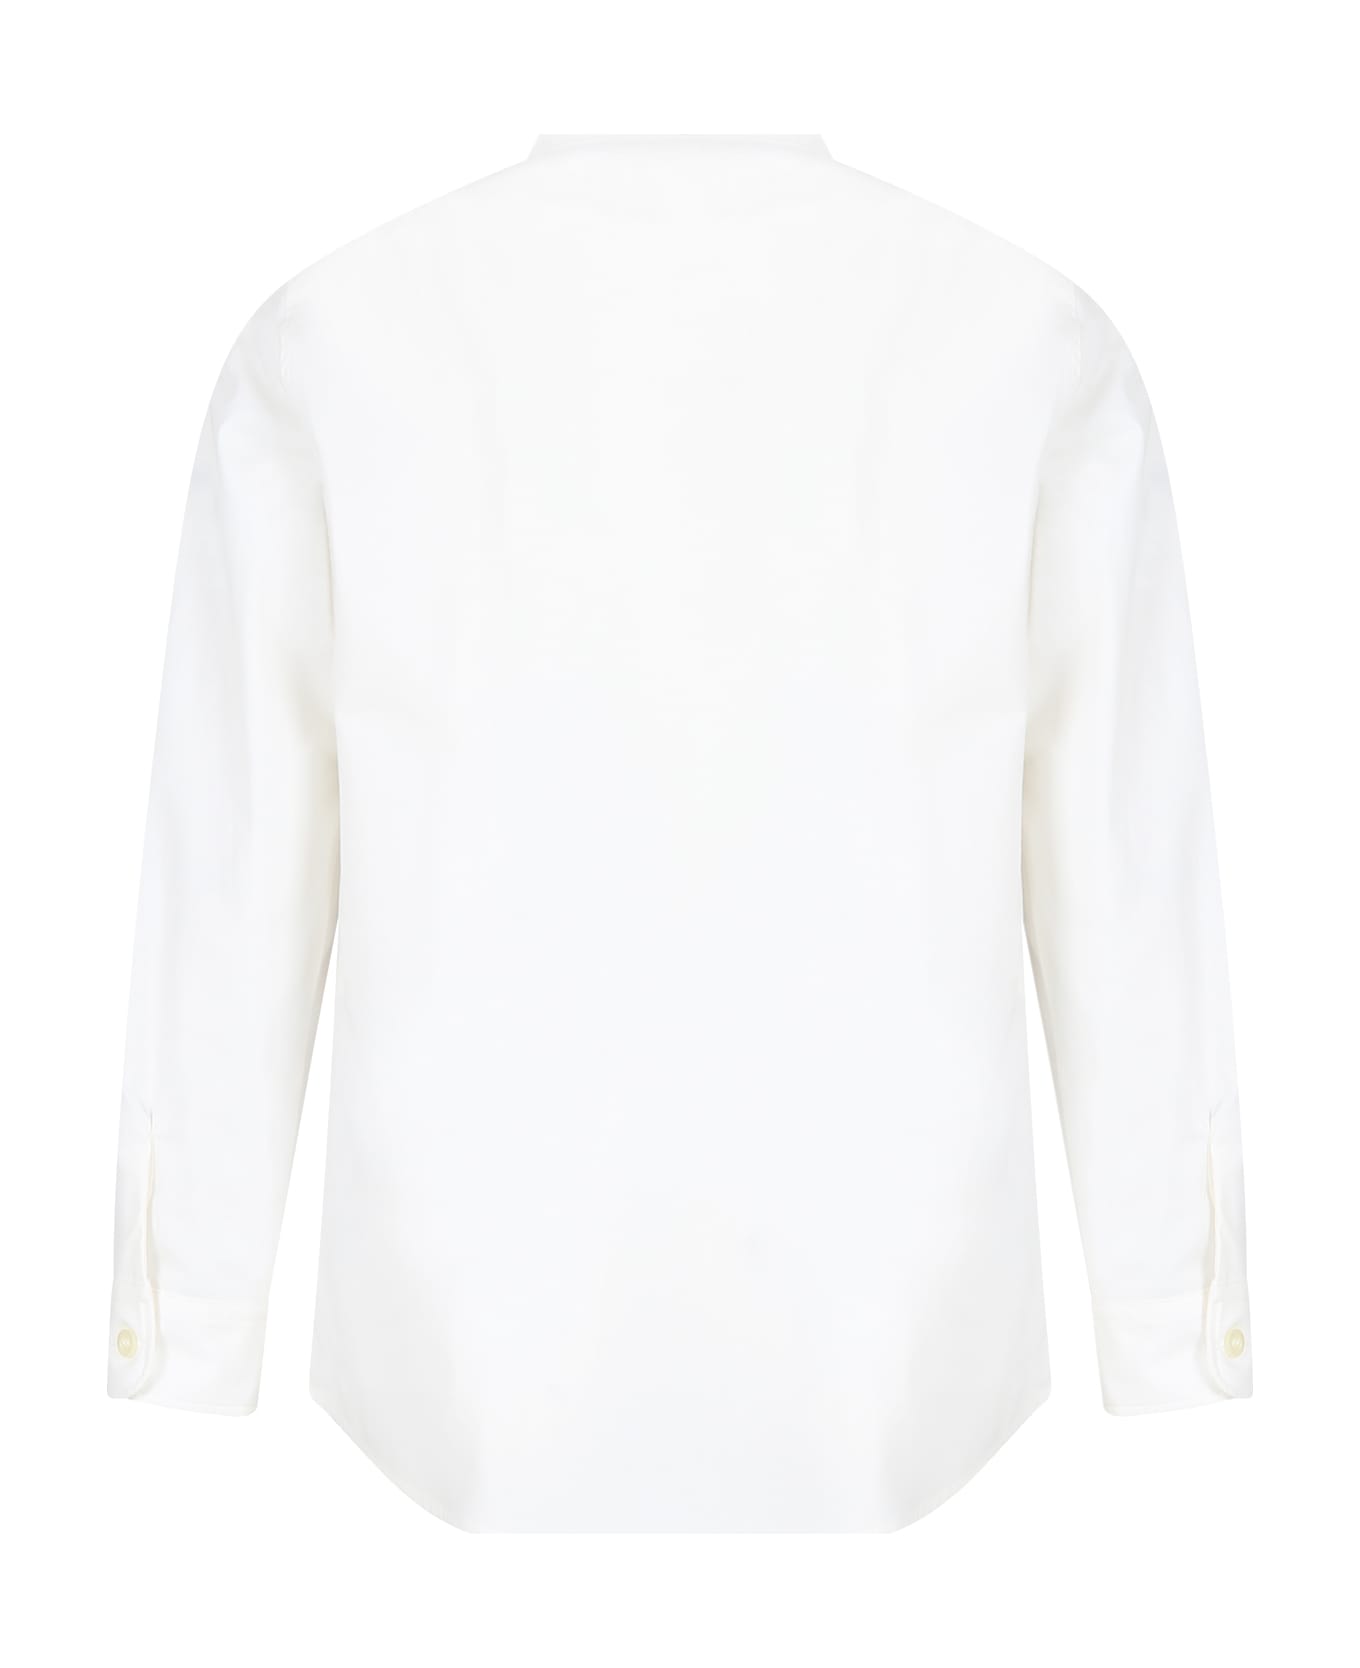 Gucci White Shirt For Boy With Gg Cross - White シャツ